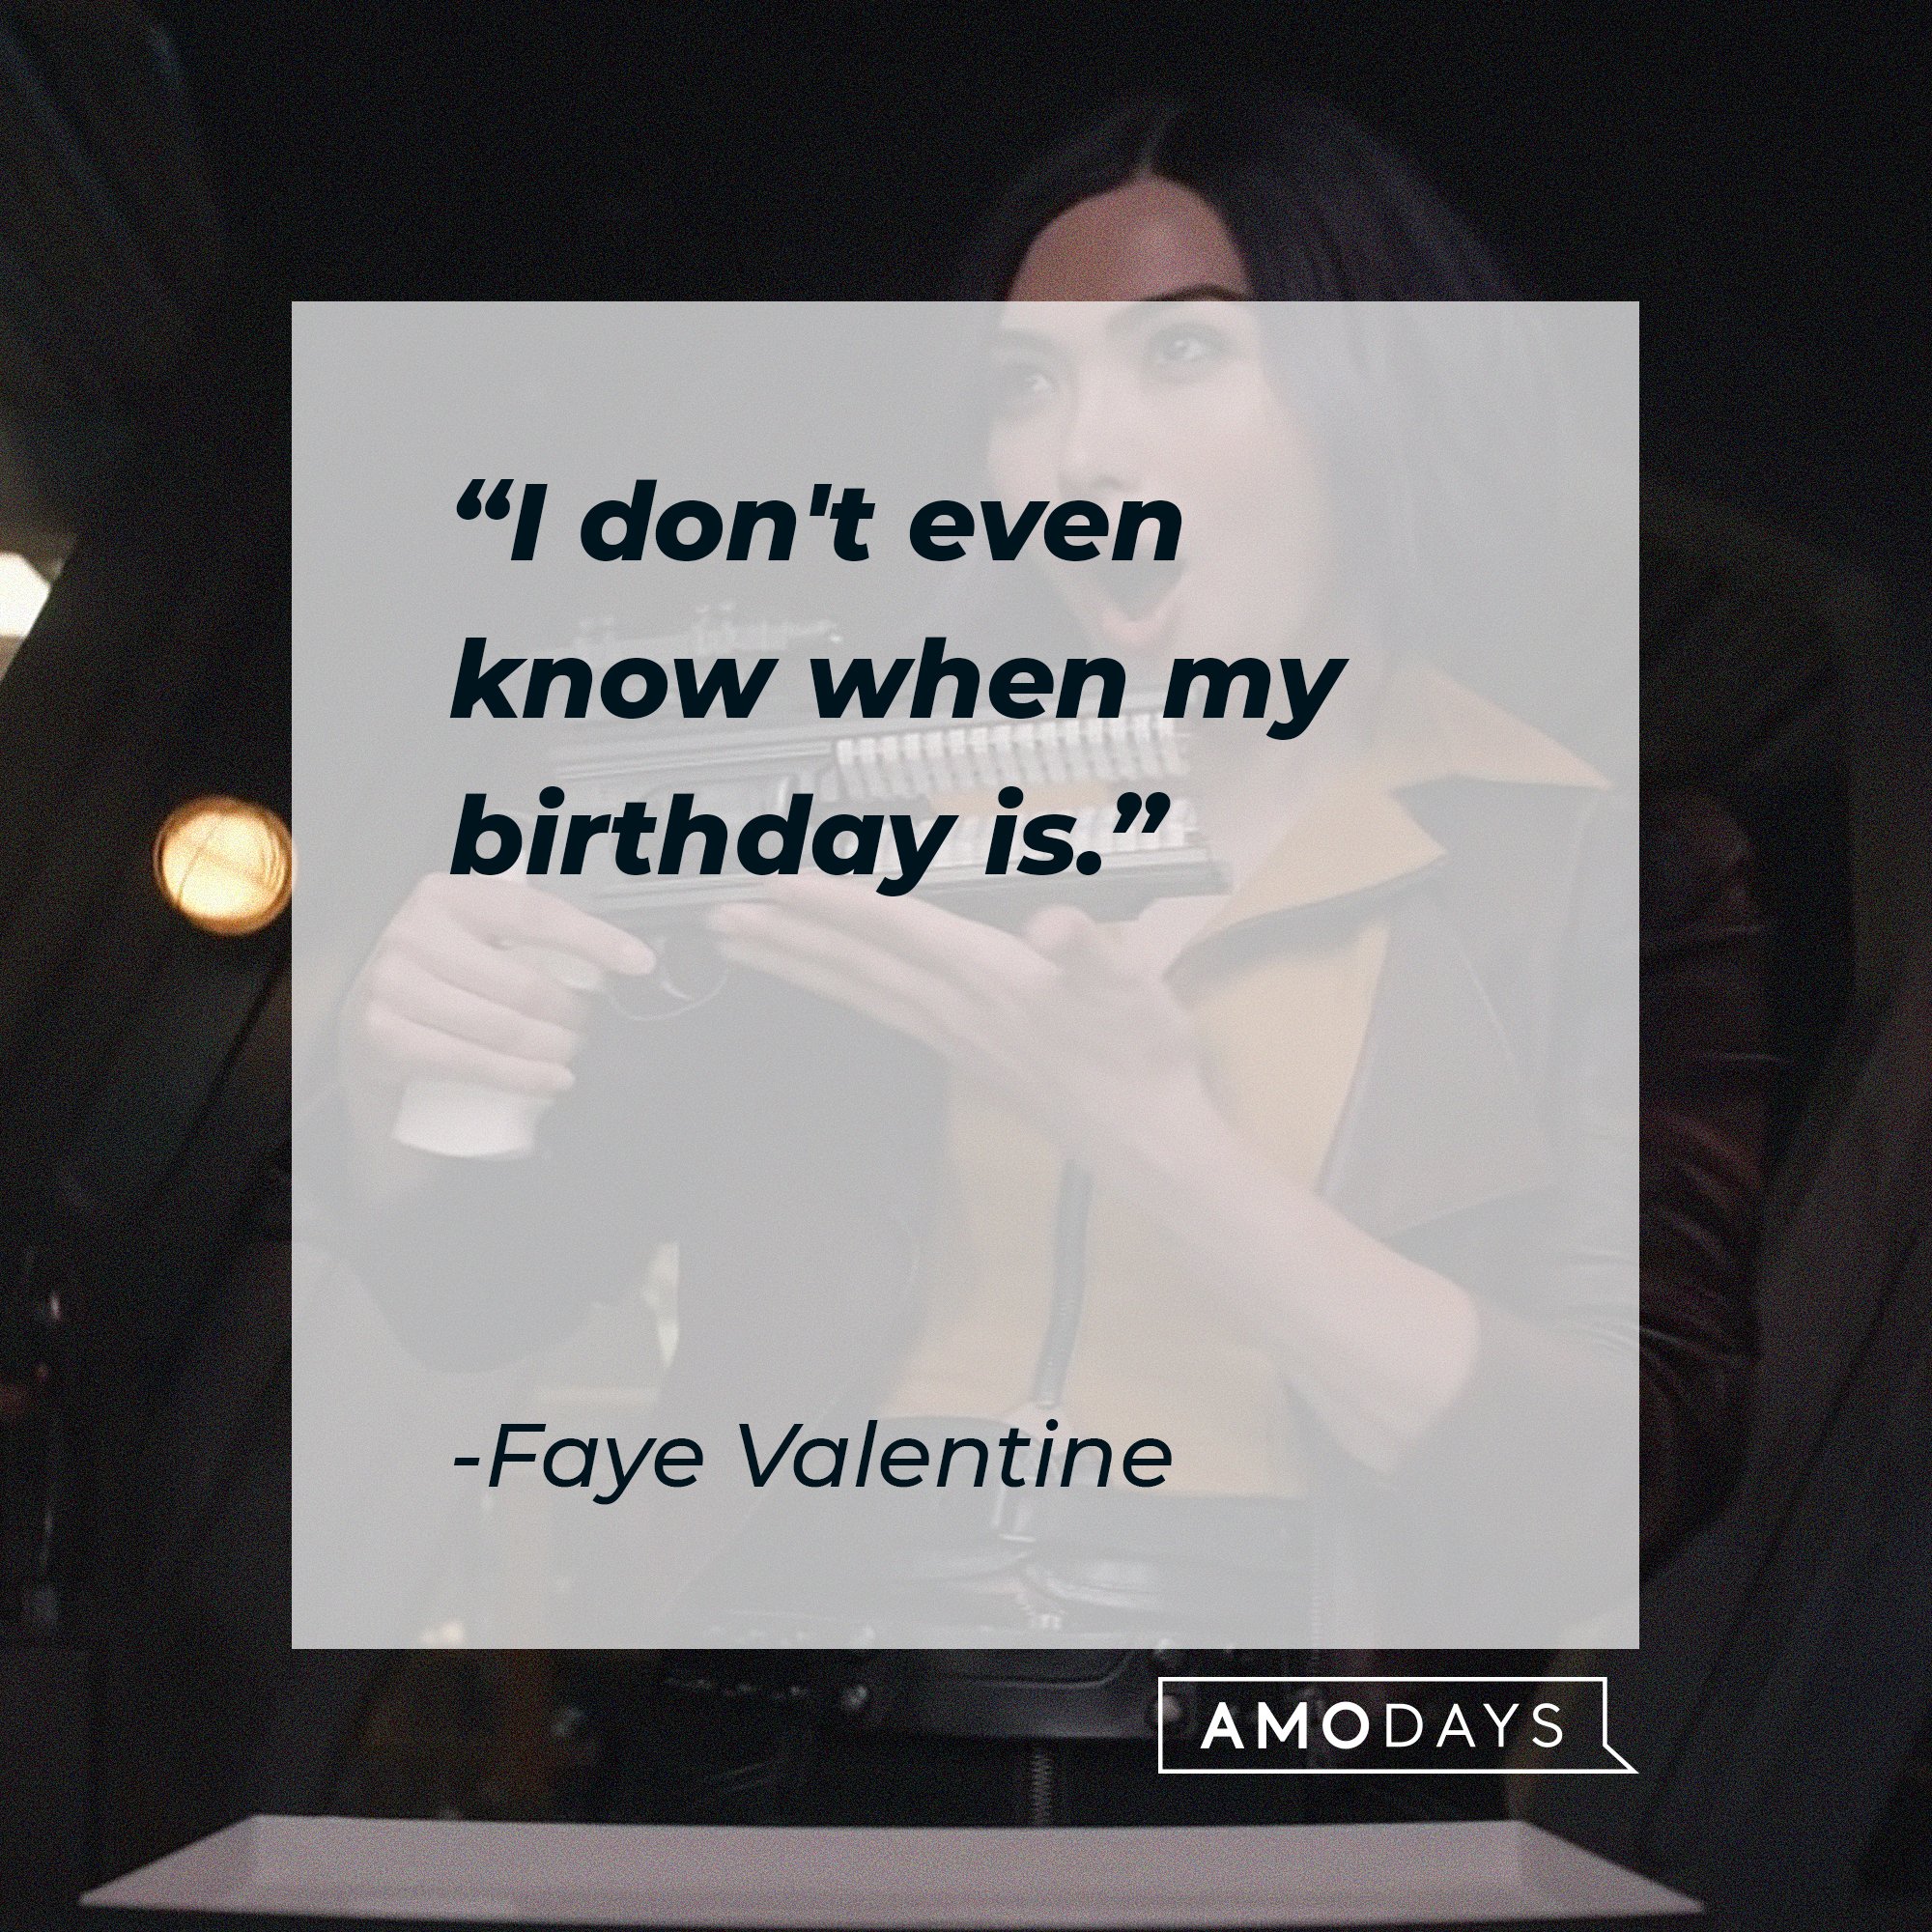 Faye Valentine’s quote: "I don't even know when my birthday is.” | Image: AmoDays